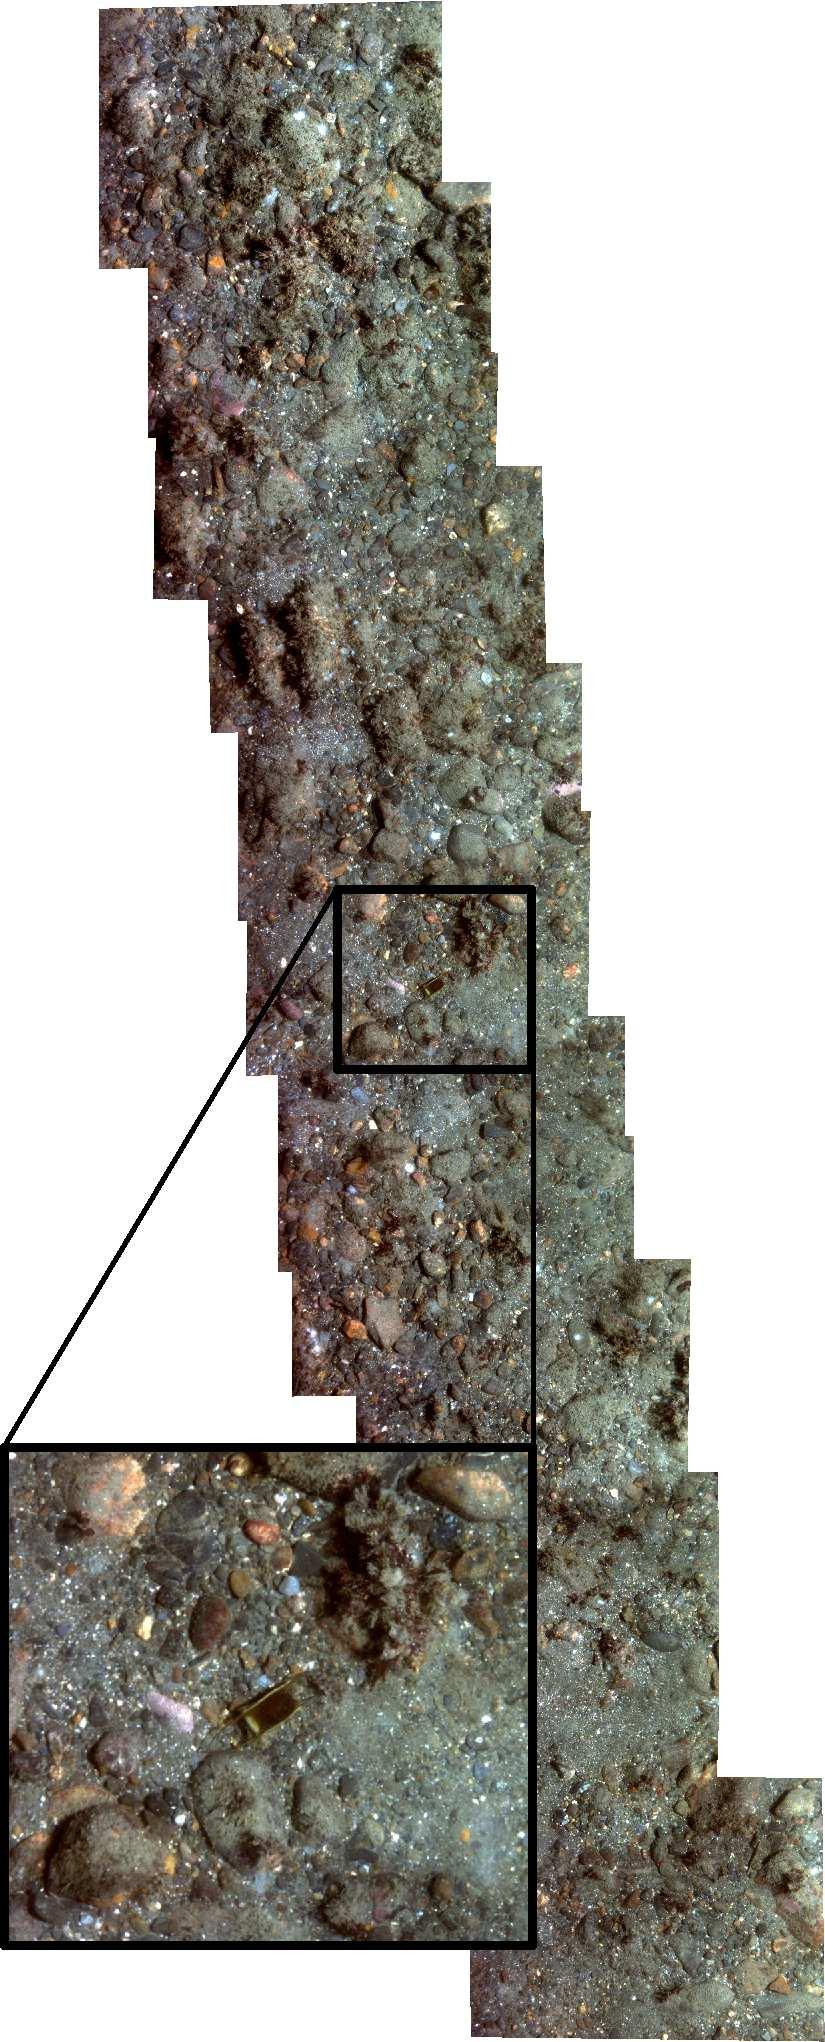 Fig. 5. Sample 1 image mosaic along a drift track. The images were taken at 1. meters altitude. The skate egg case, likely Leucoraja sp., in the highlighted section is approximately 8 cm in length.